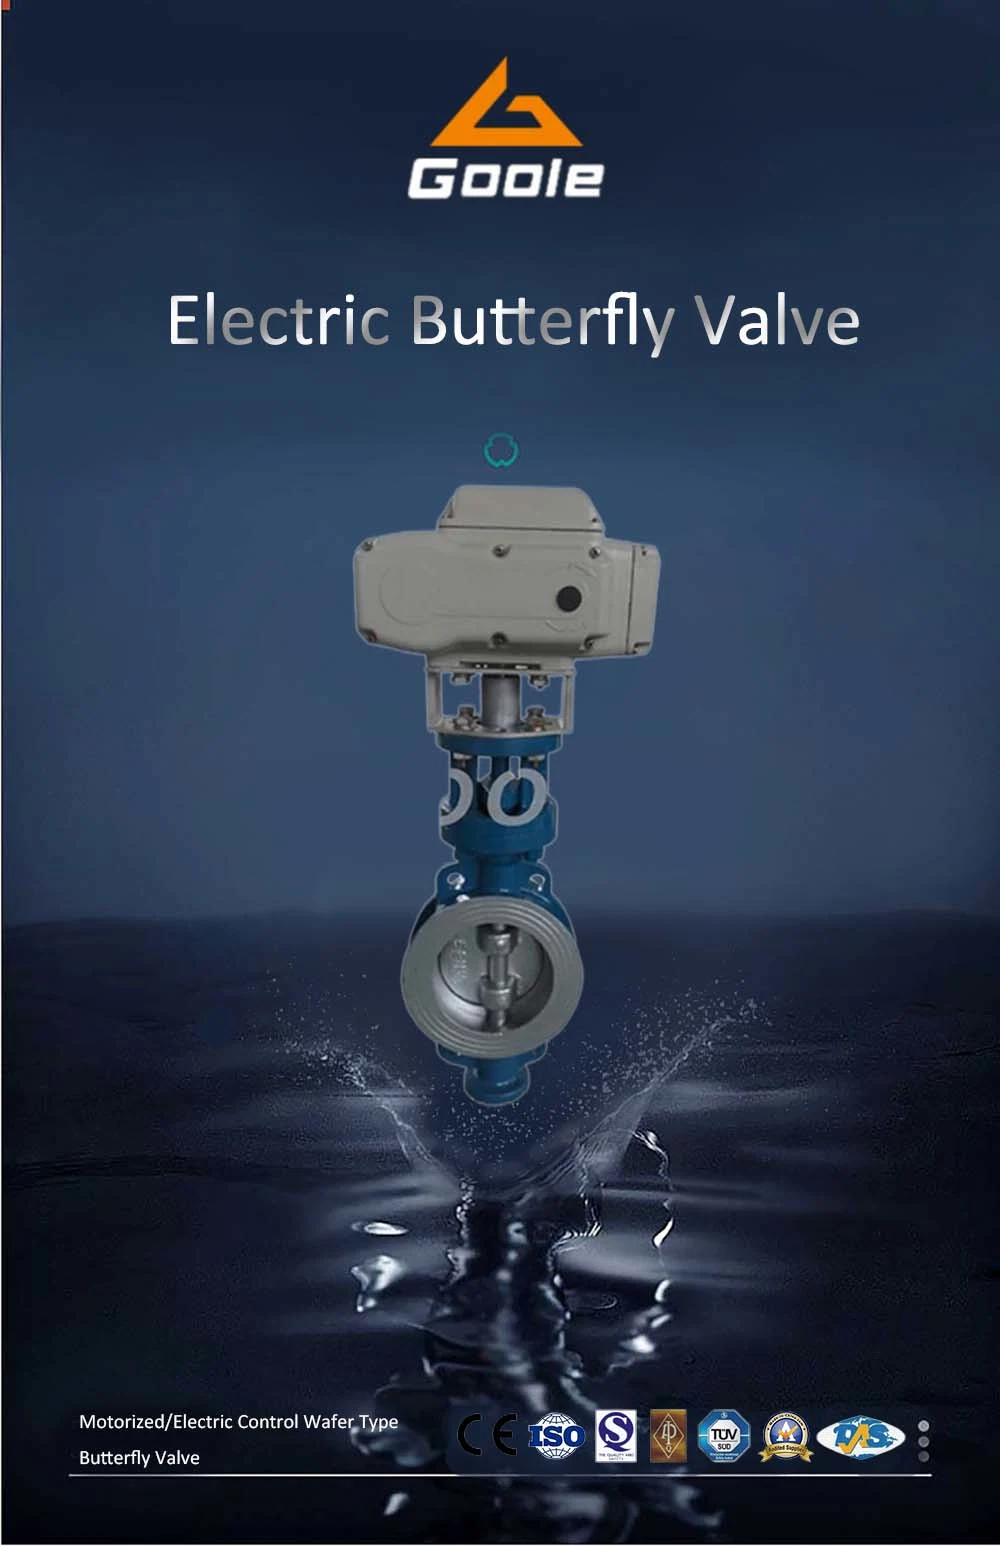 Motorized/Electric Control Type Wafer Butterfly Valve (GAD973H)